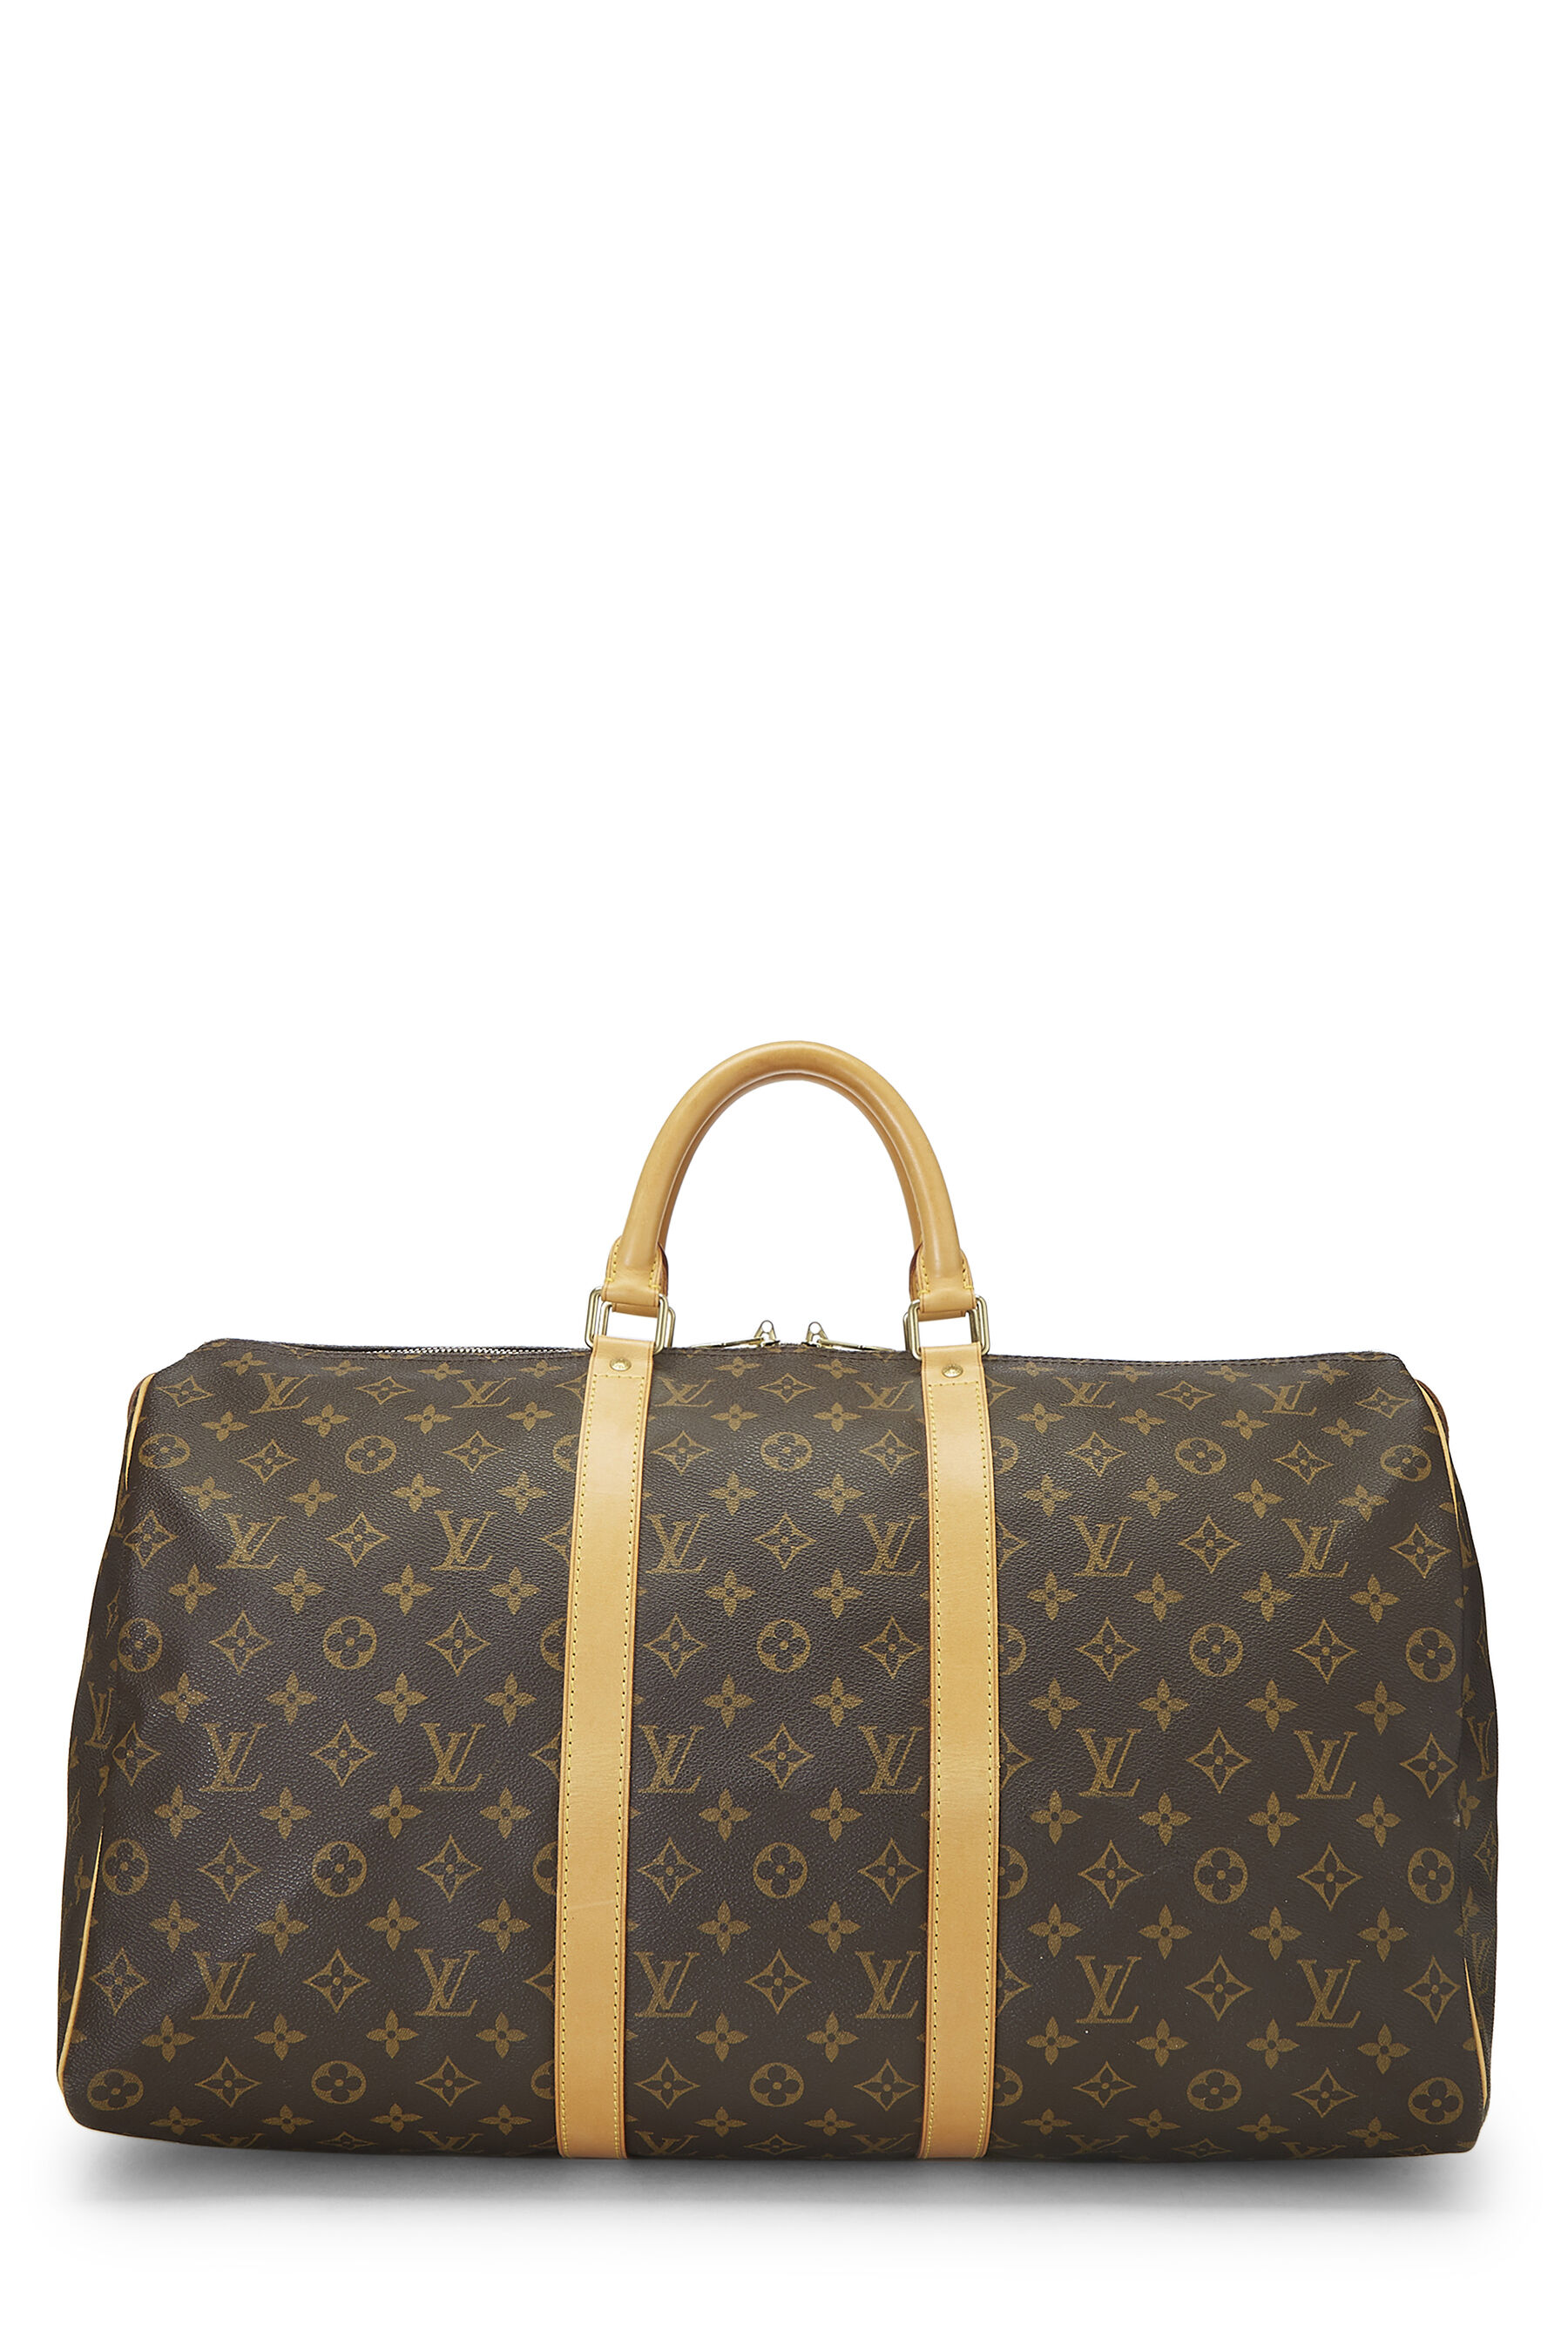 Check out this #LouisVuitton #KeepallLightUp #Keepall bag by the late